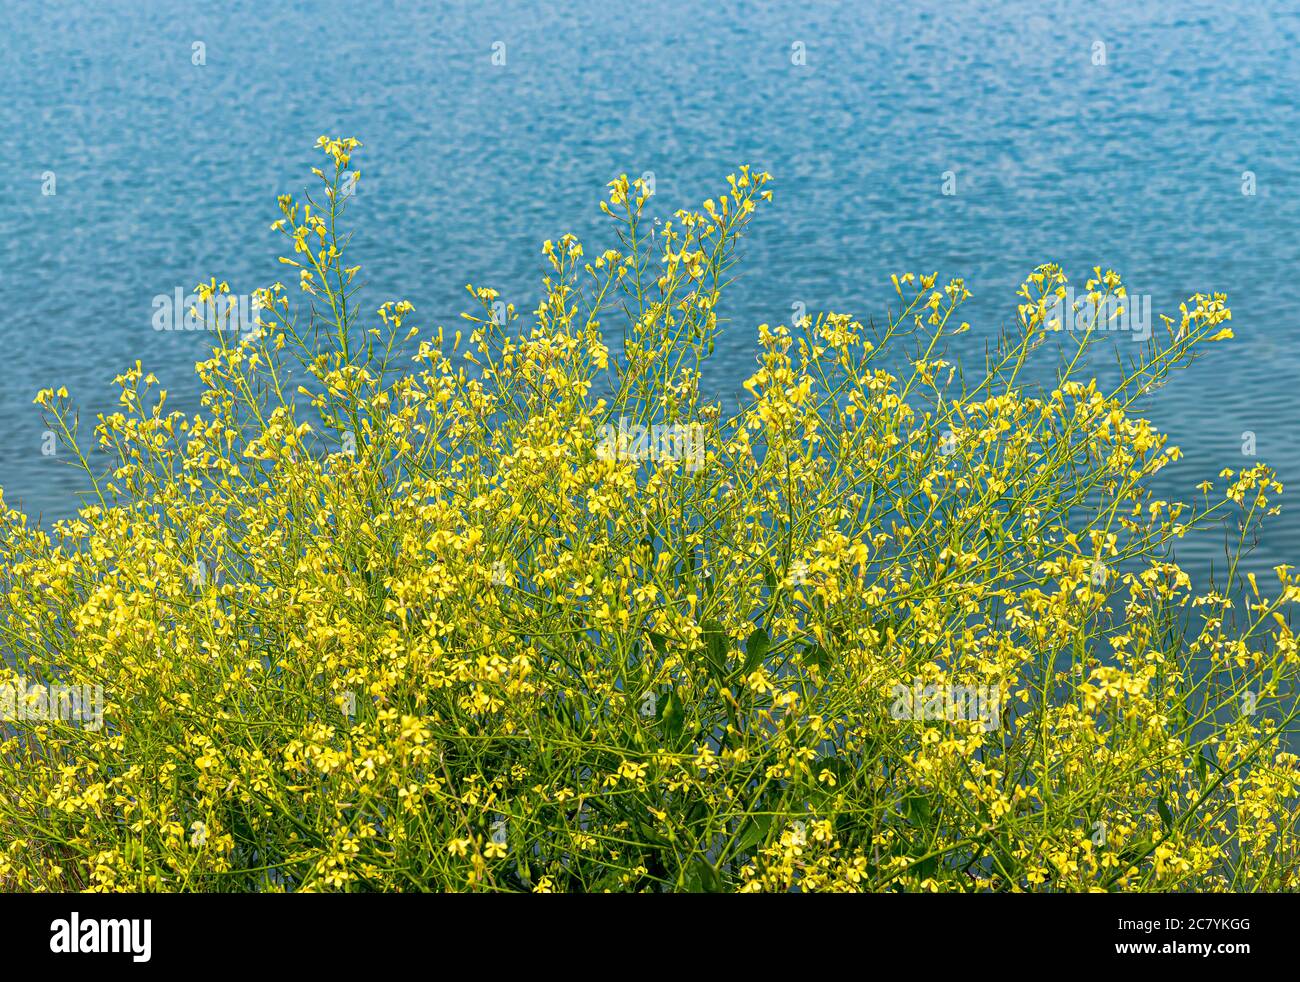 Yellow Brassica napus flowers in bloom on the lakeshore on a sunny day. Stock Photo